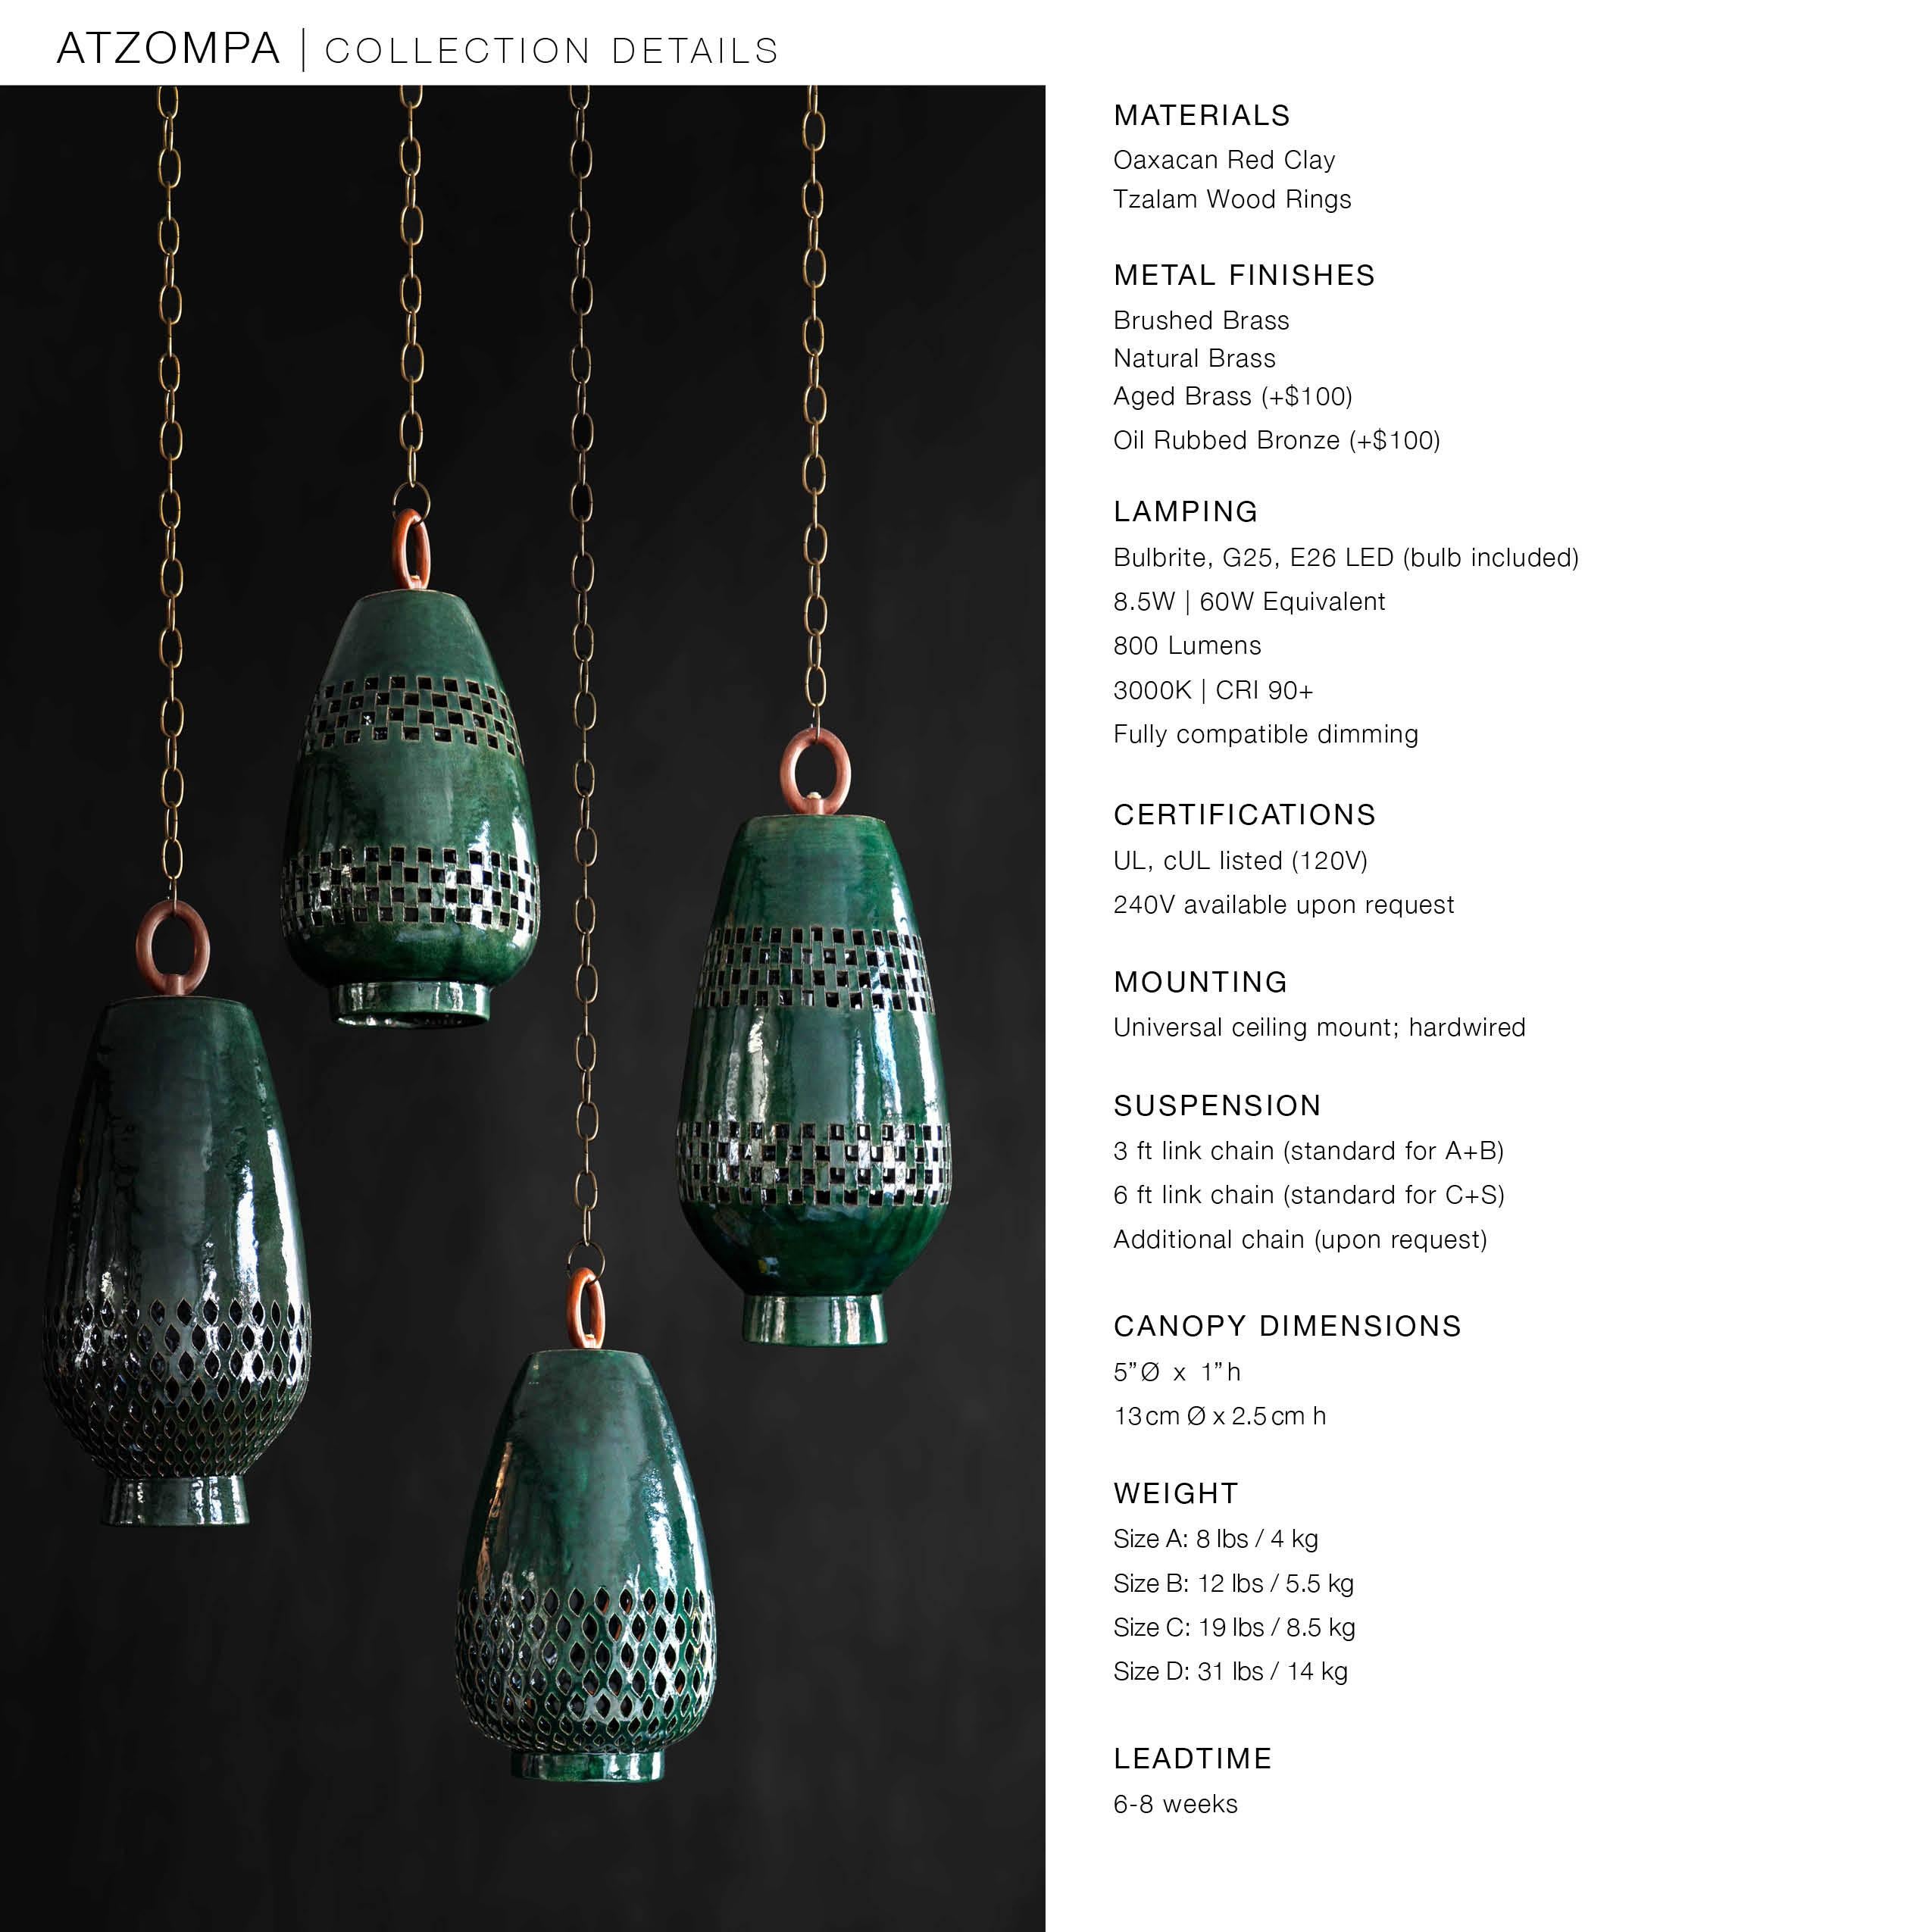 Hand-Crafted Large Emerald Ceramic Pendant Light, Aged Brass, Diamantes Atzompa Collection For Sale